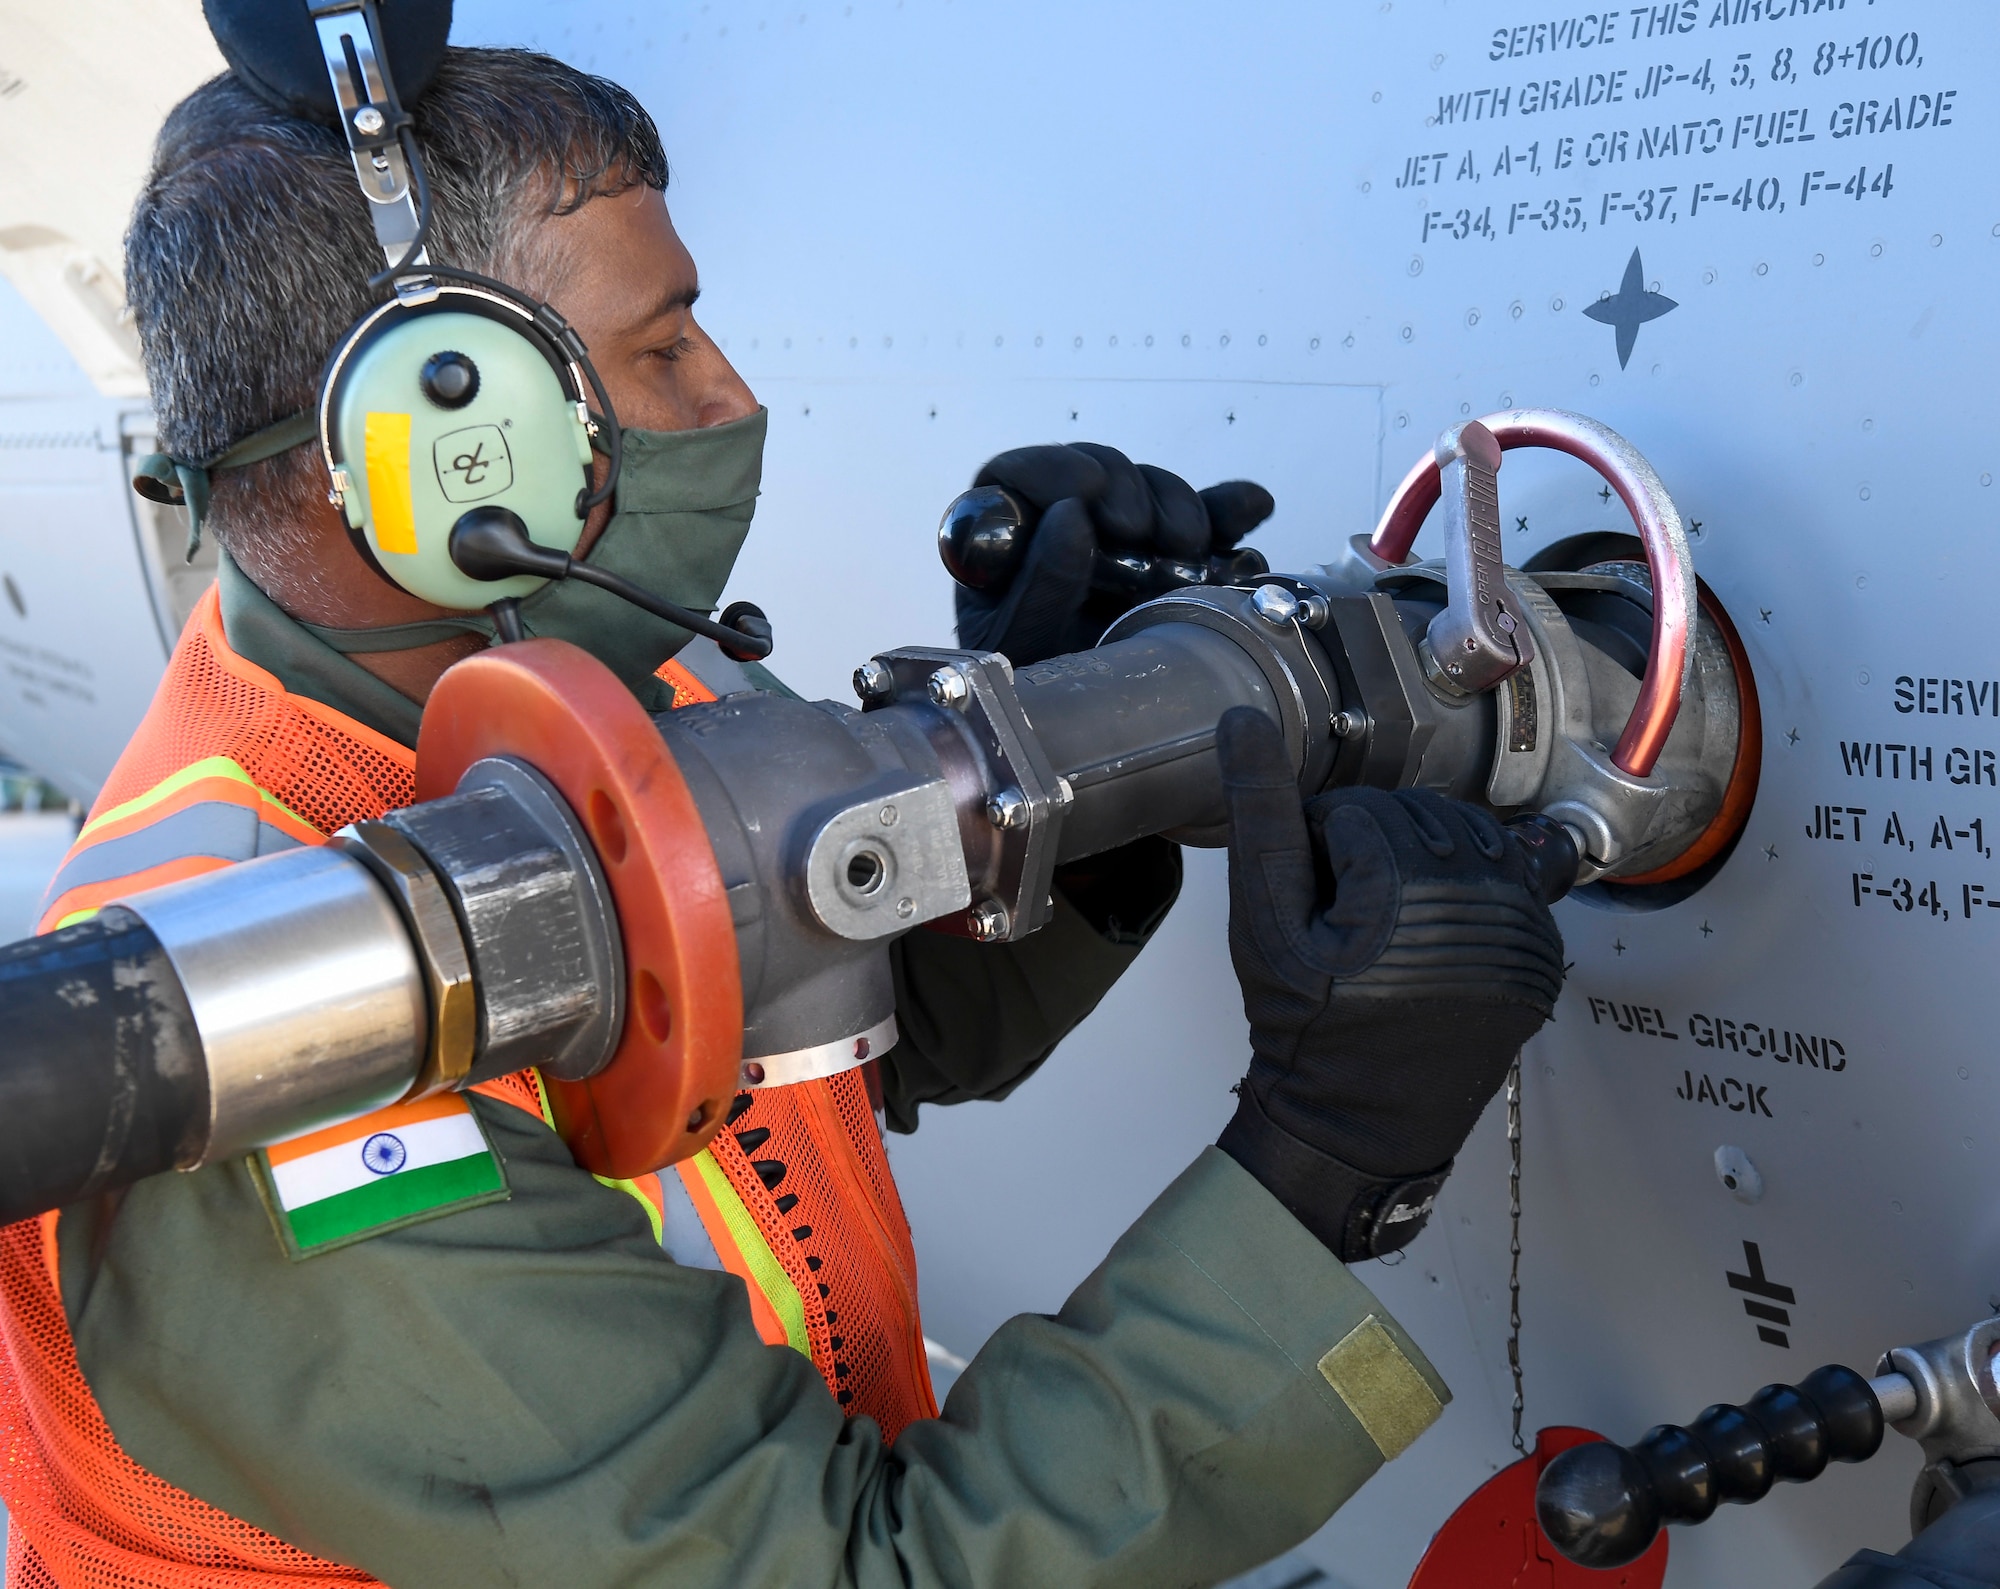 A member of the Indian air force 28th Wing attaches a fuel hose to an Indian air force C-17 Globemaster III at Dover Air Force Base, Delaware, Nov. 20, 2020. The U.S. strengthens its international partnerships through foreign military sales. Dover AFB actively supports $3.5 billion worth of FMS due to its strategic location and 436th Aerial Port Squadron, the largest aerial port in the Department of Defense. As the world’s oldest and largest democracies, the United States and India share a commitment to freedom, human rights and rule of law. (U.S. Air Force photo by Senior Airman Christopher Quail)